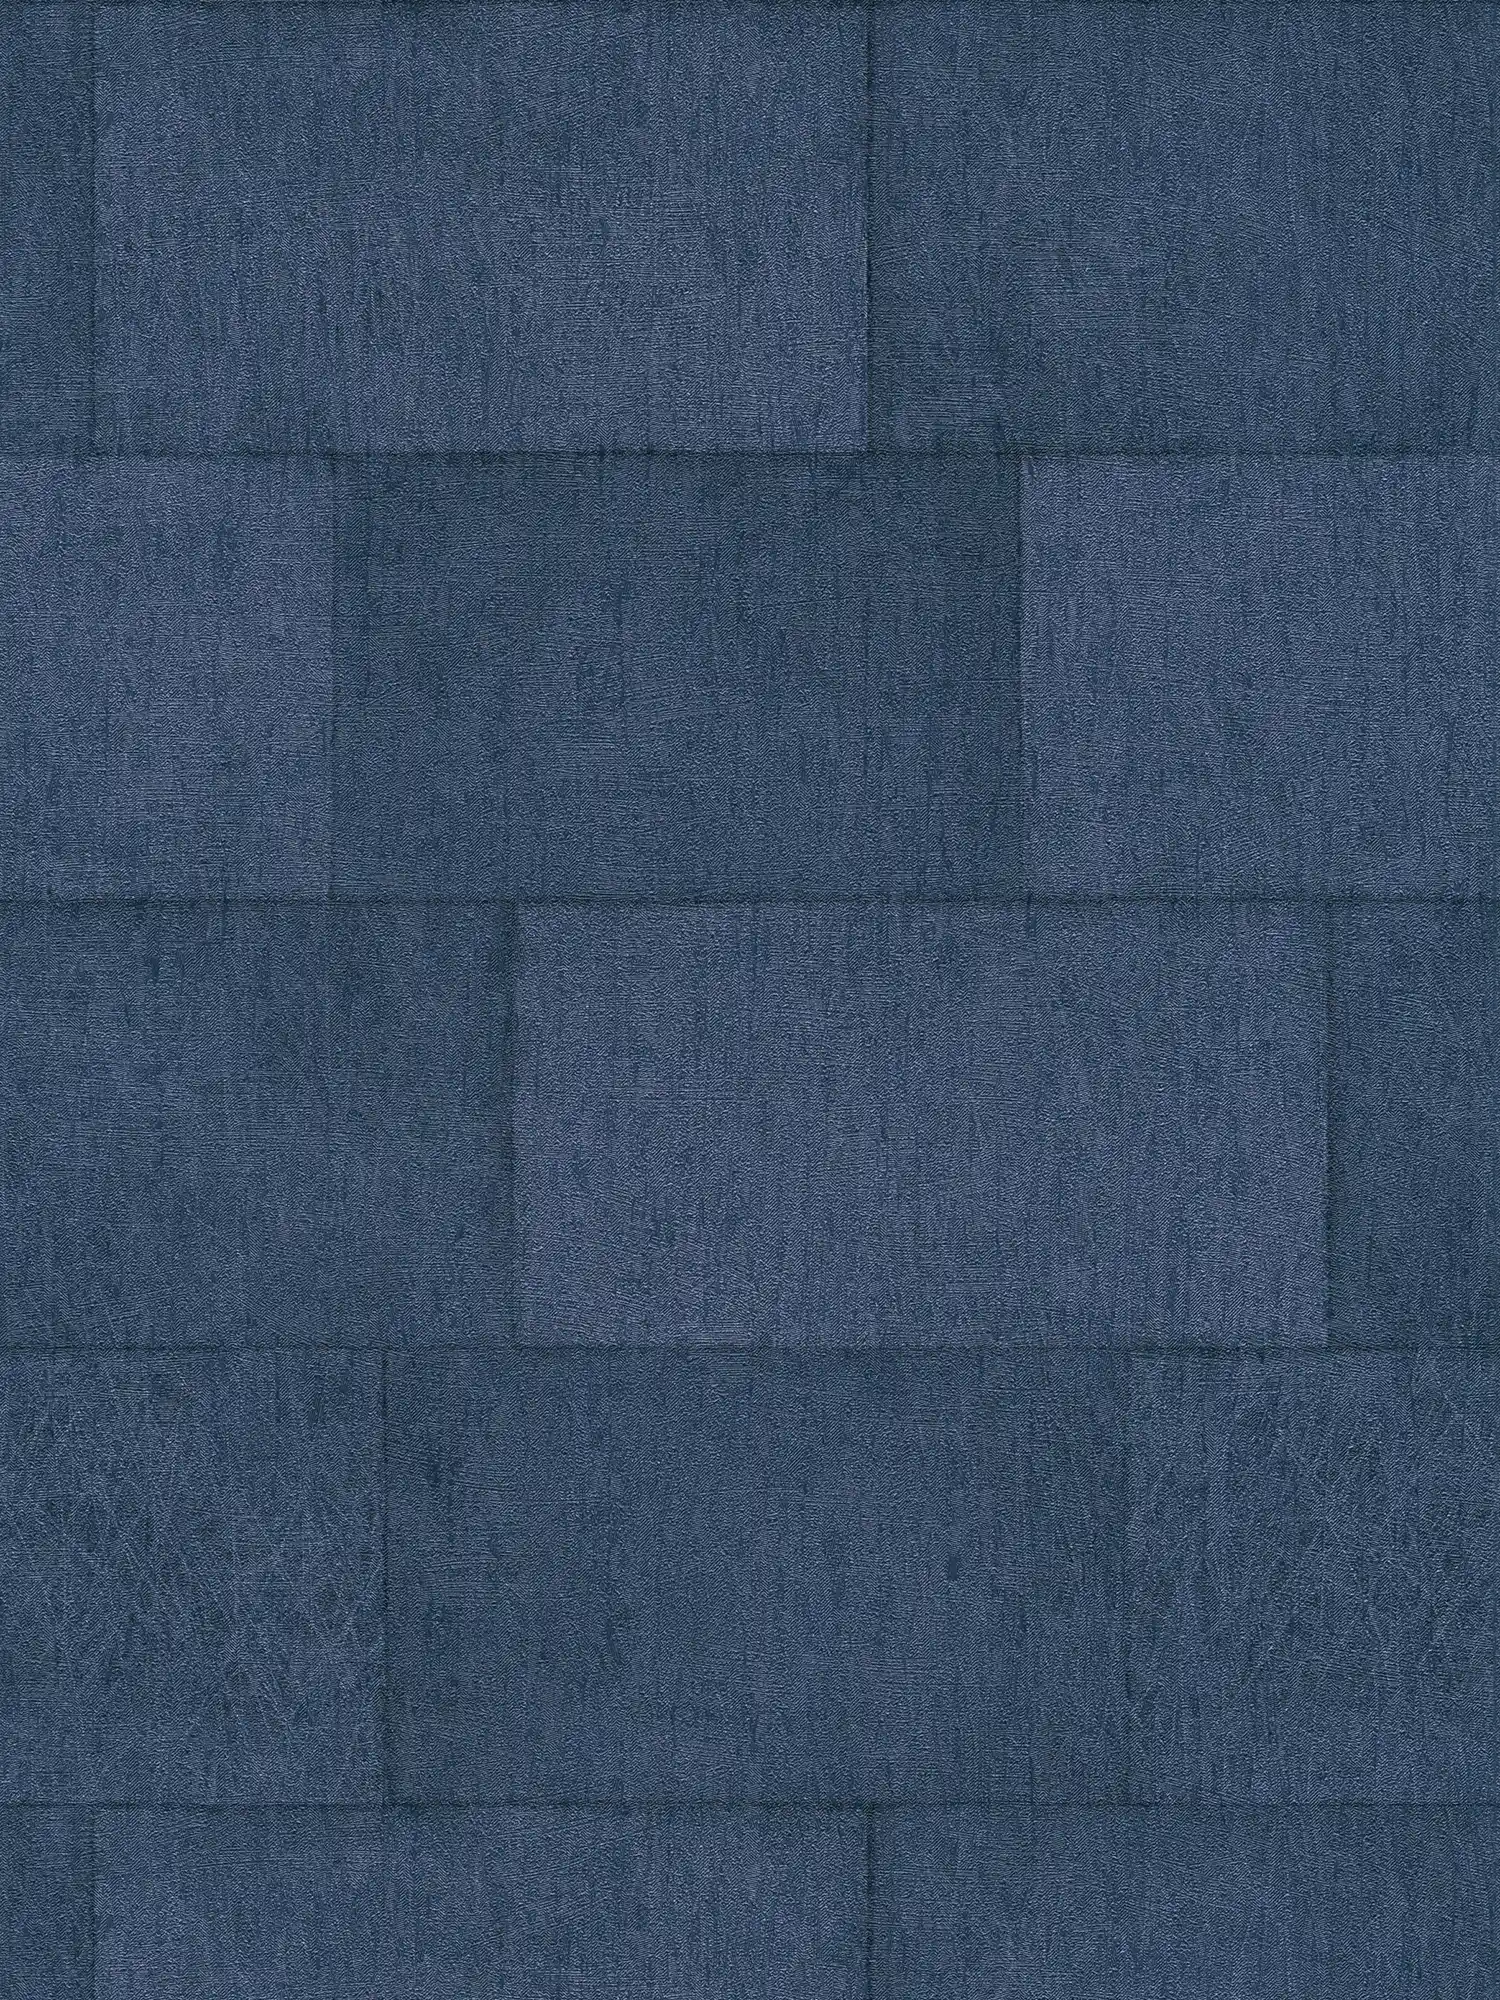 Stone wallpaper dark blue with glossy effect - blue
